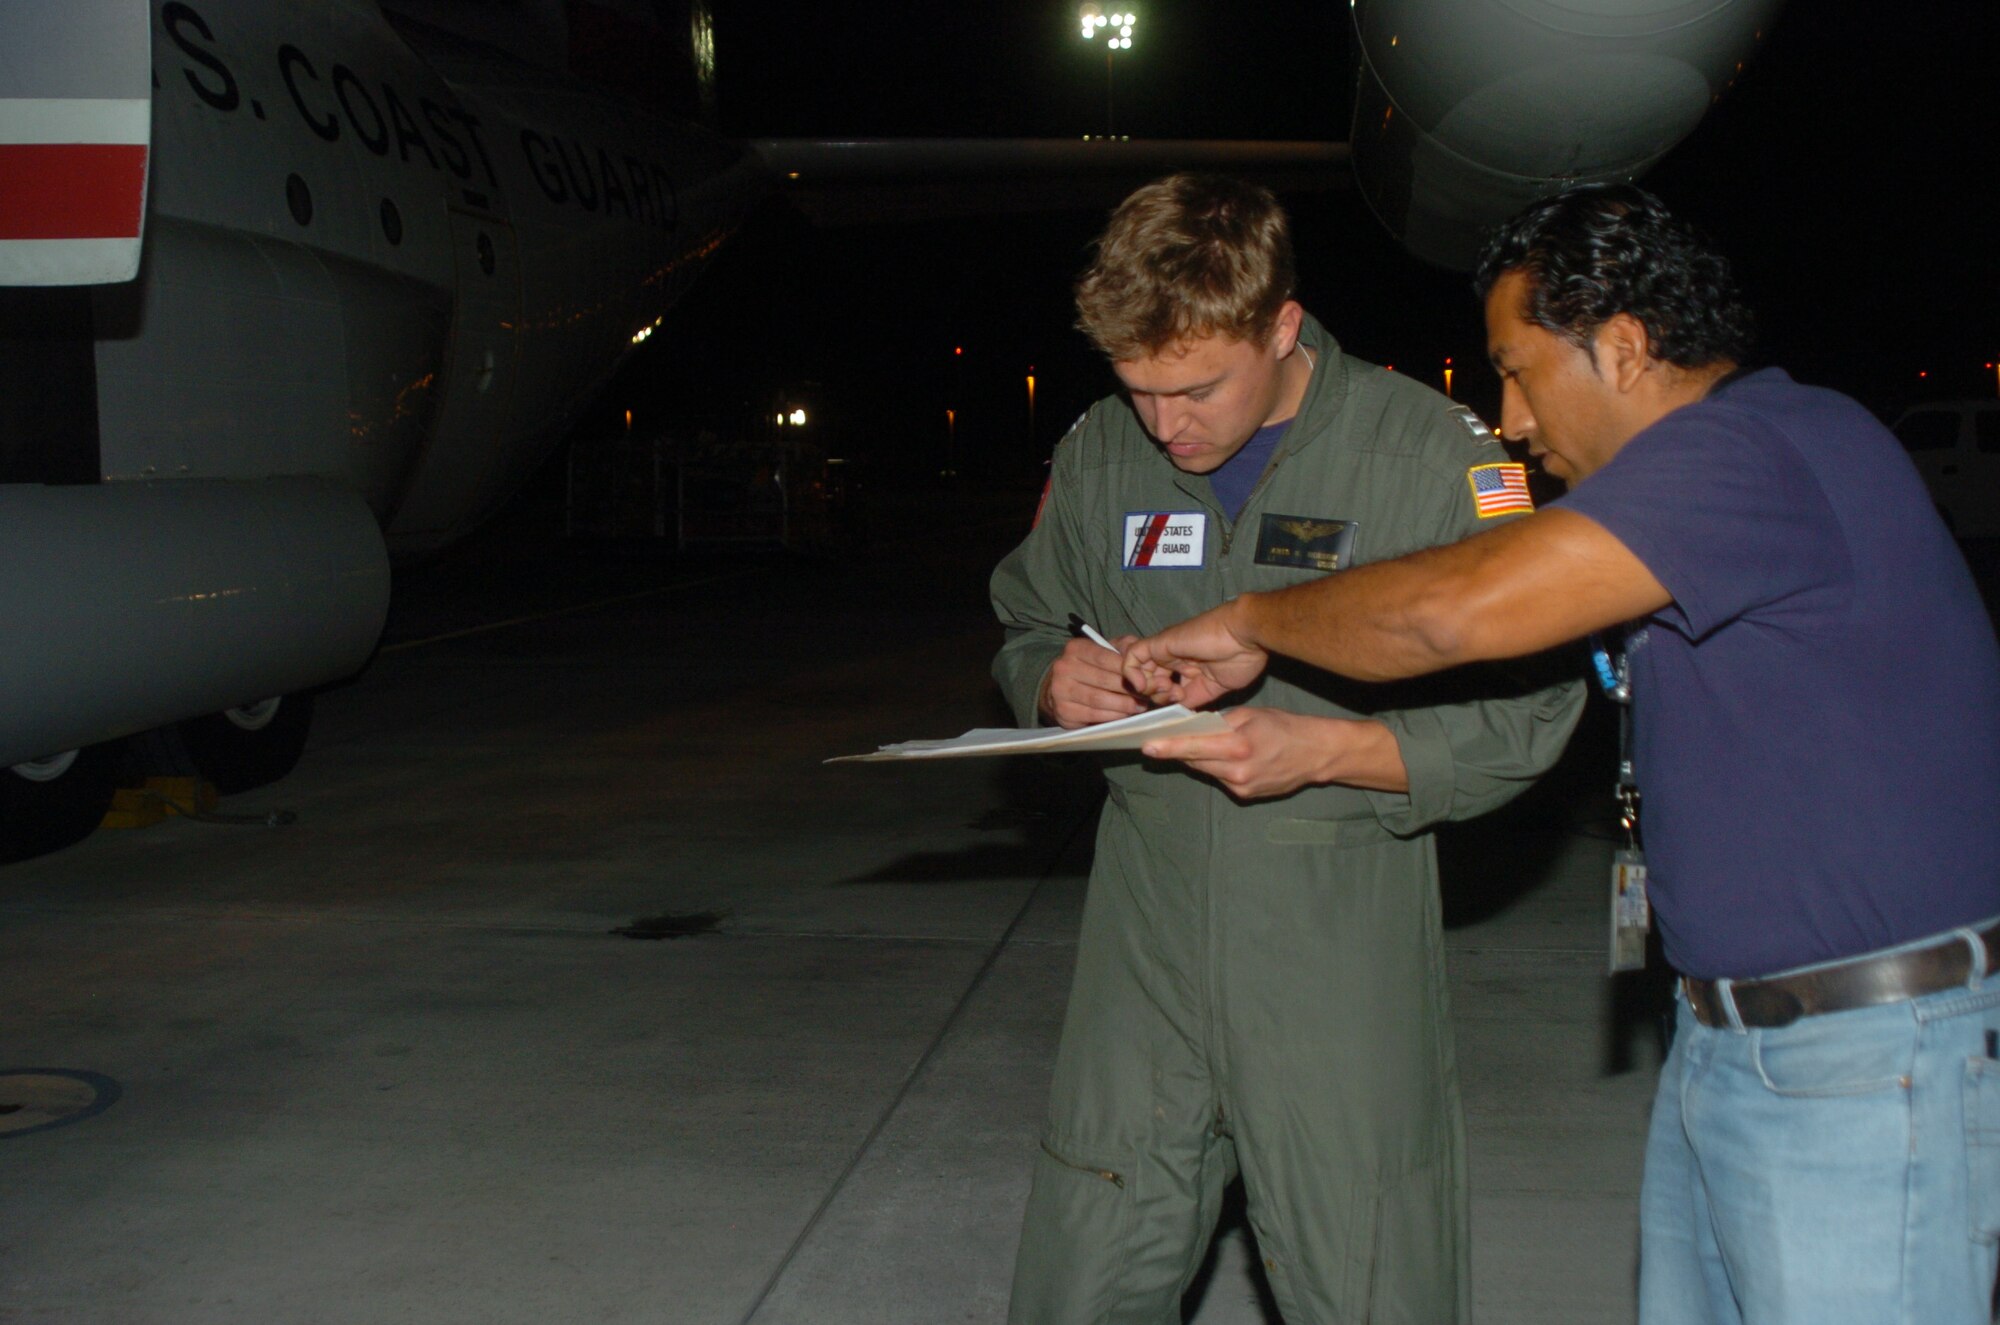 Lieutenant James K. Morrow, a member of the Coast Guard HC-130 crew, finalizes paperwork for Bolívar Nunez, a contractor for ITT Federal Services International Corporation.  LT Morrow was on the HC-130 Hercules that carried more than one million vitamins and a generator for donation by a non-profit organization to local schools and orphanages in Ecuador.  The Coast Guard crew is deployed to Forward Operating Location, Manta, Ecuador from Air Station Clearwater, Fla.  (U.S. Air Force photo/Capt. Ashley Norris)
